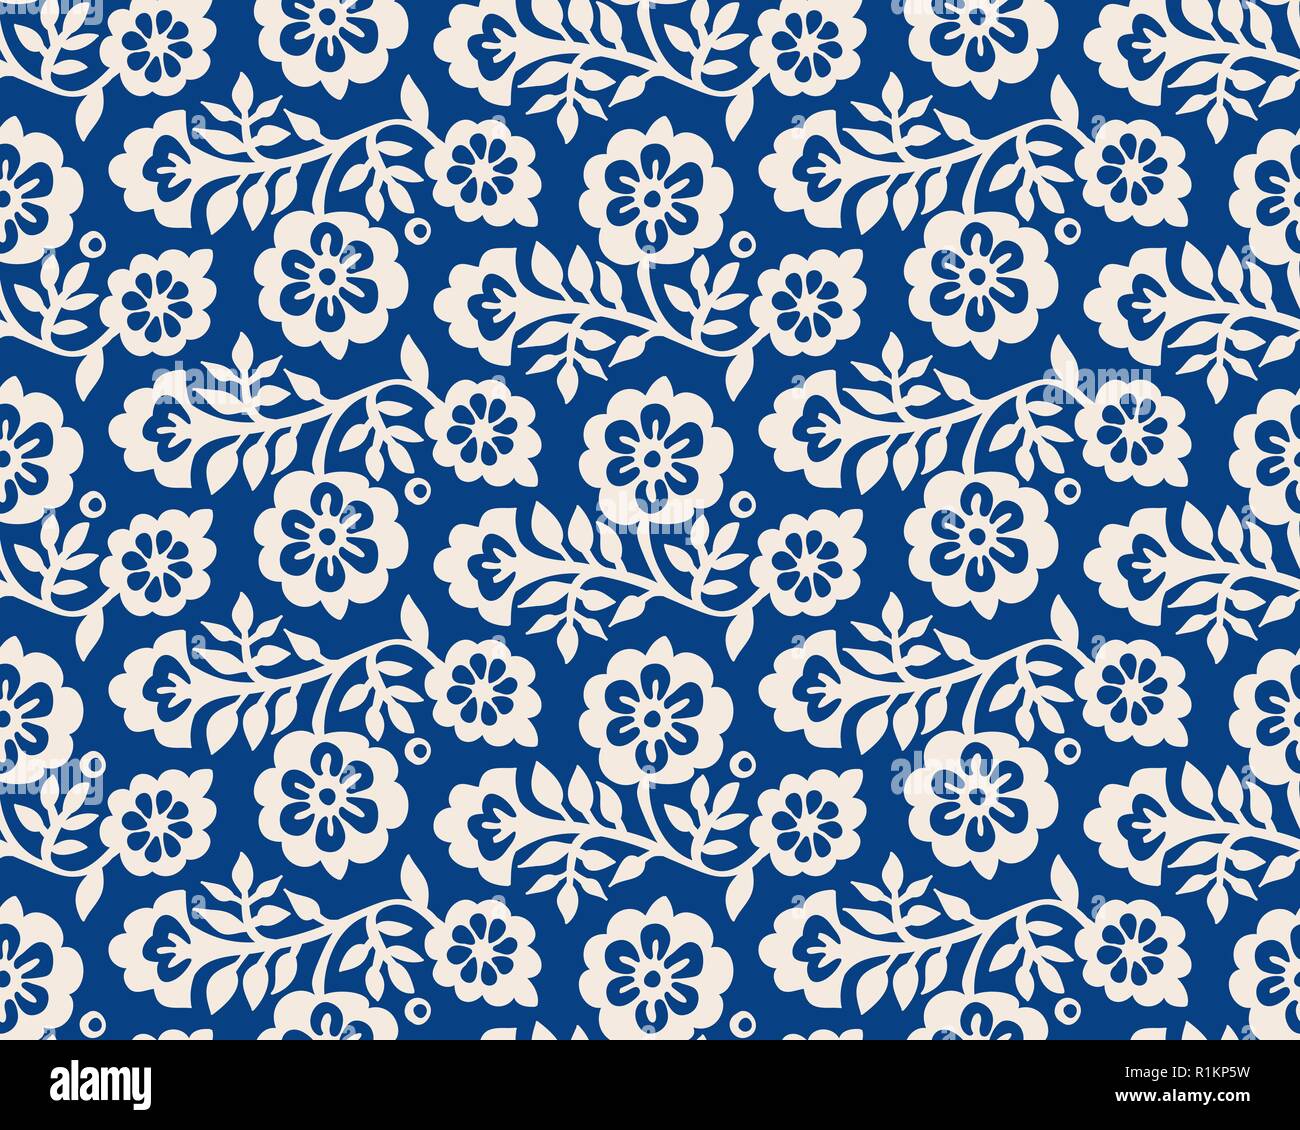 Seamless indigo woodblock printed floral pattern. Vector ethnic ornament, traditional Russian motif with blossoms, ecru on navy blue background. Stock Vector